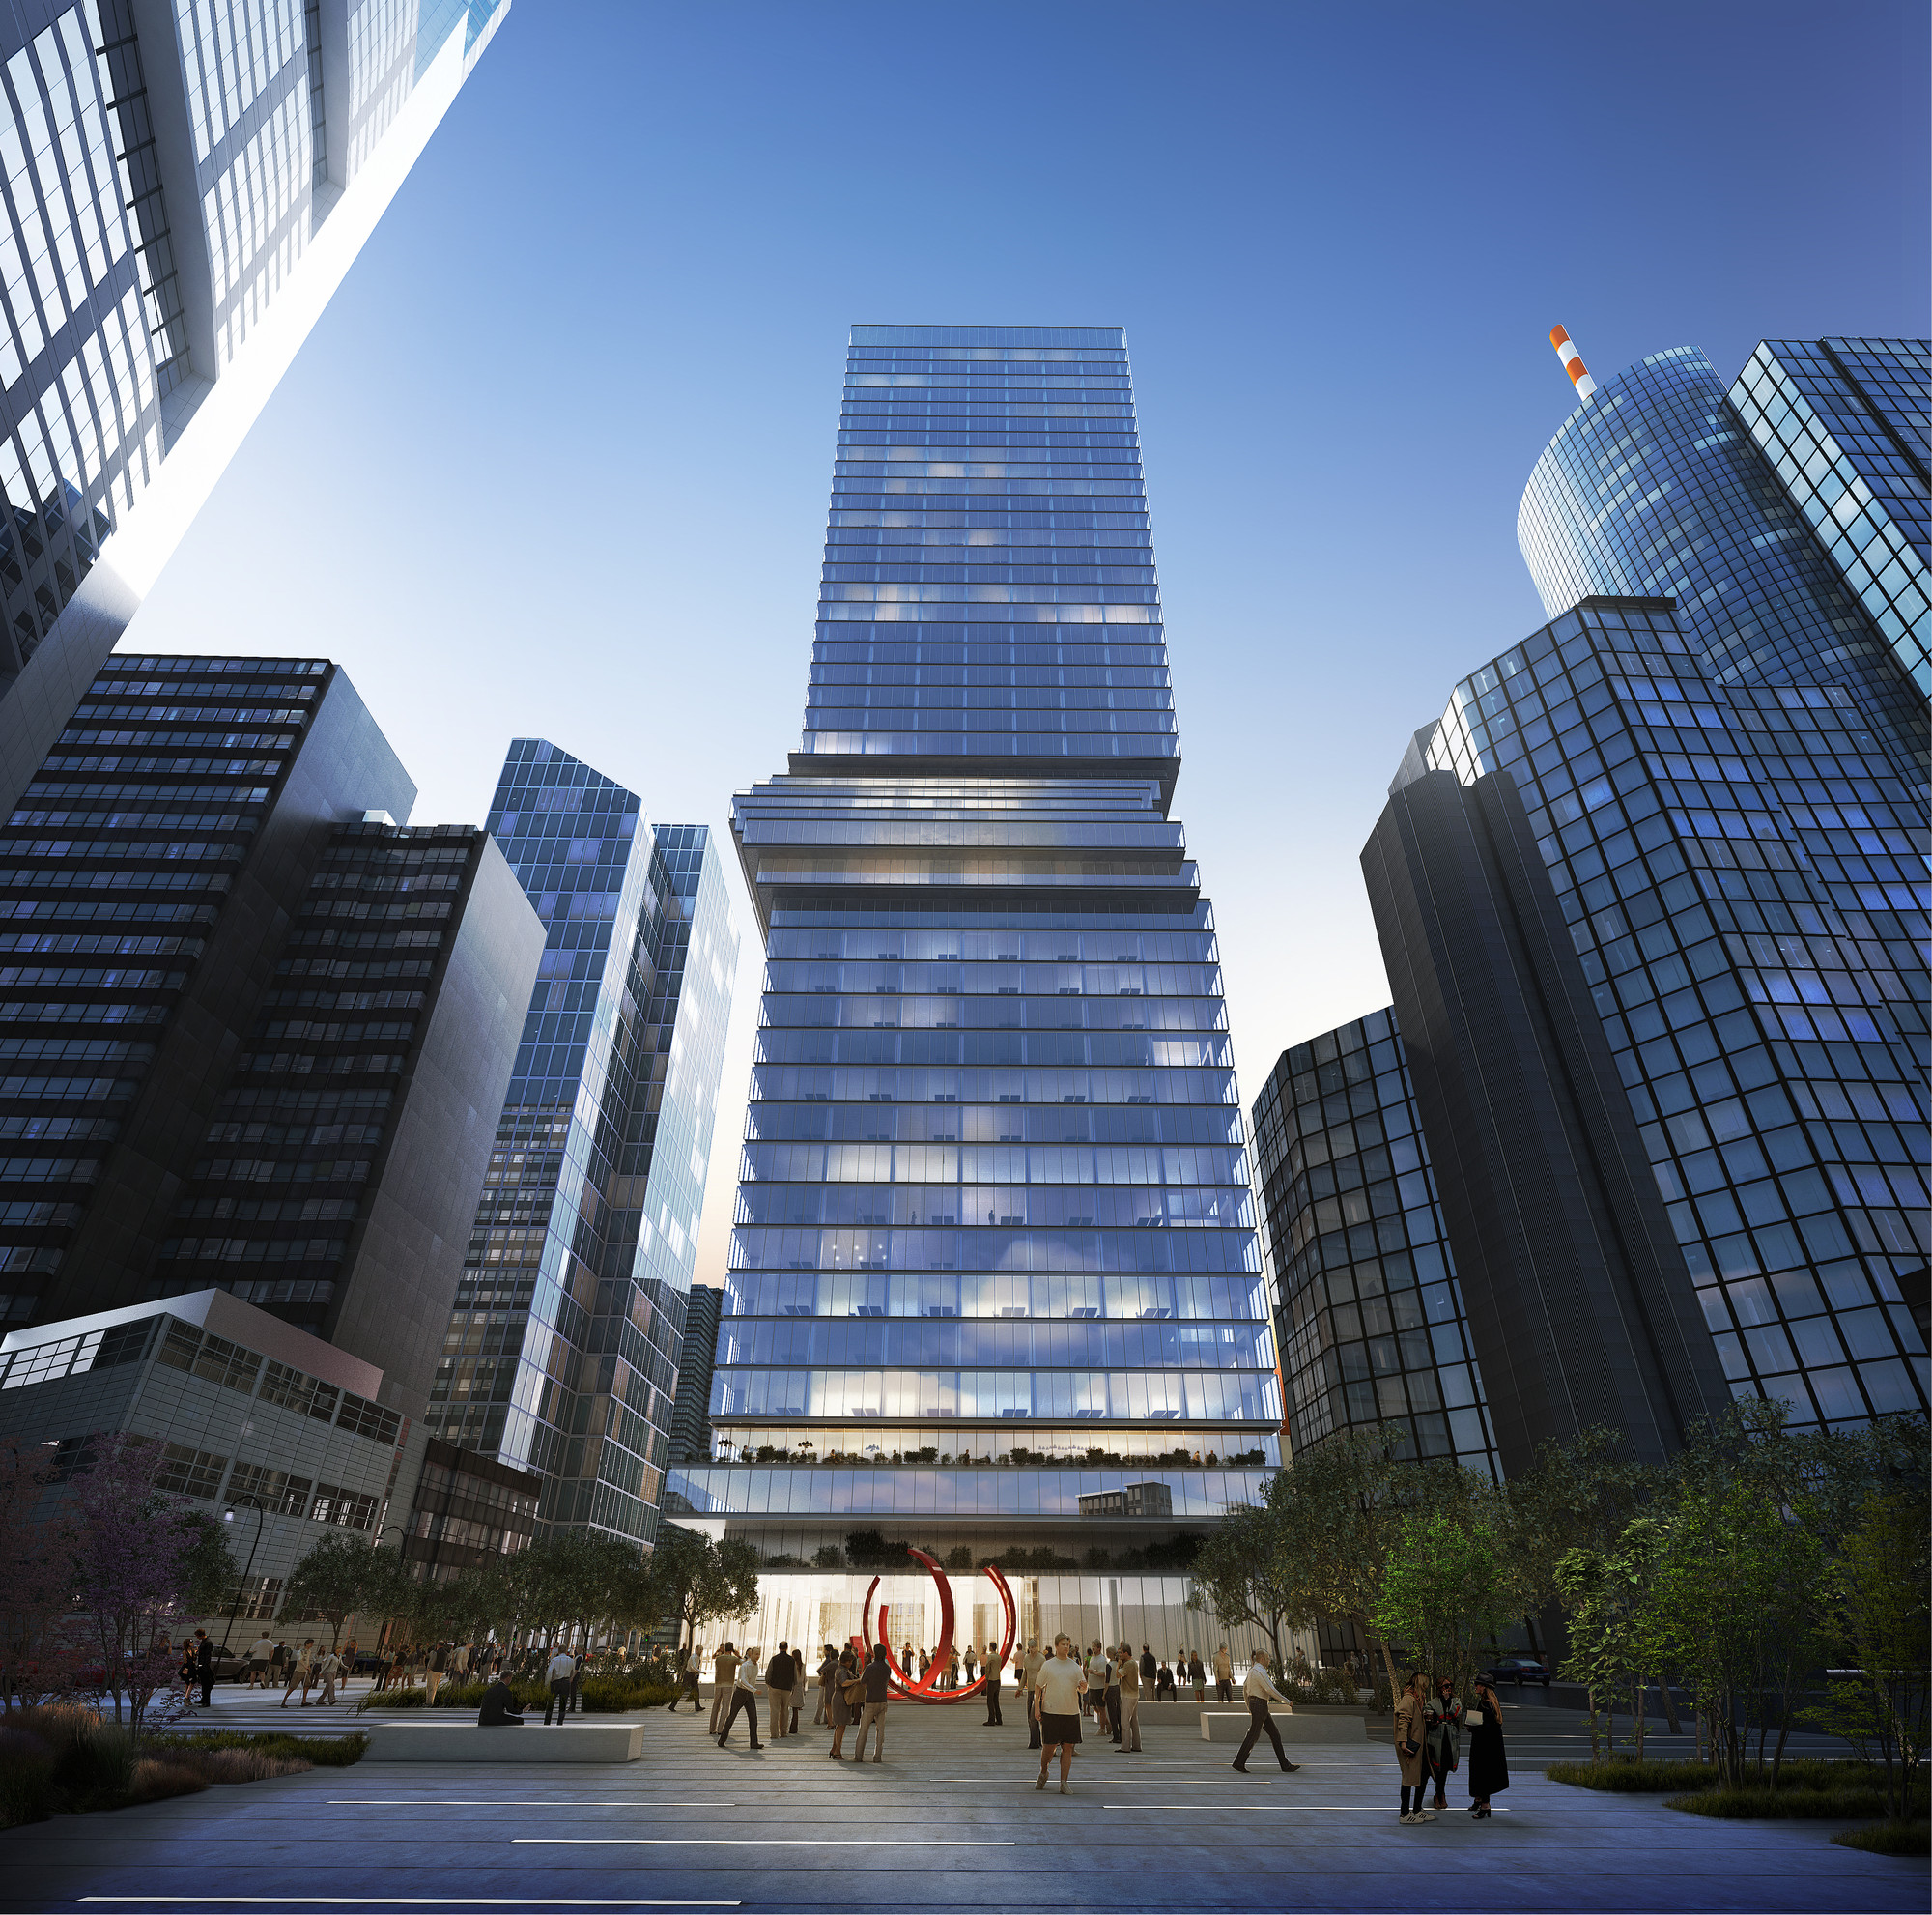 BIG Designs New Tower for Frankfurt | ArchDaily